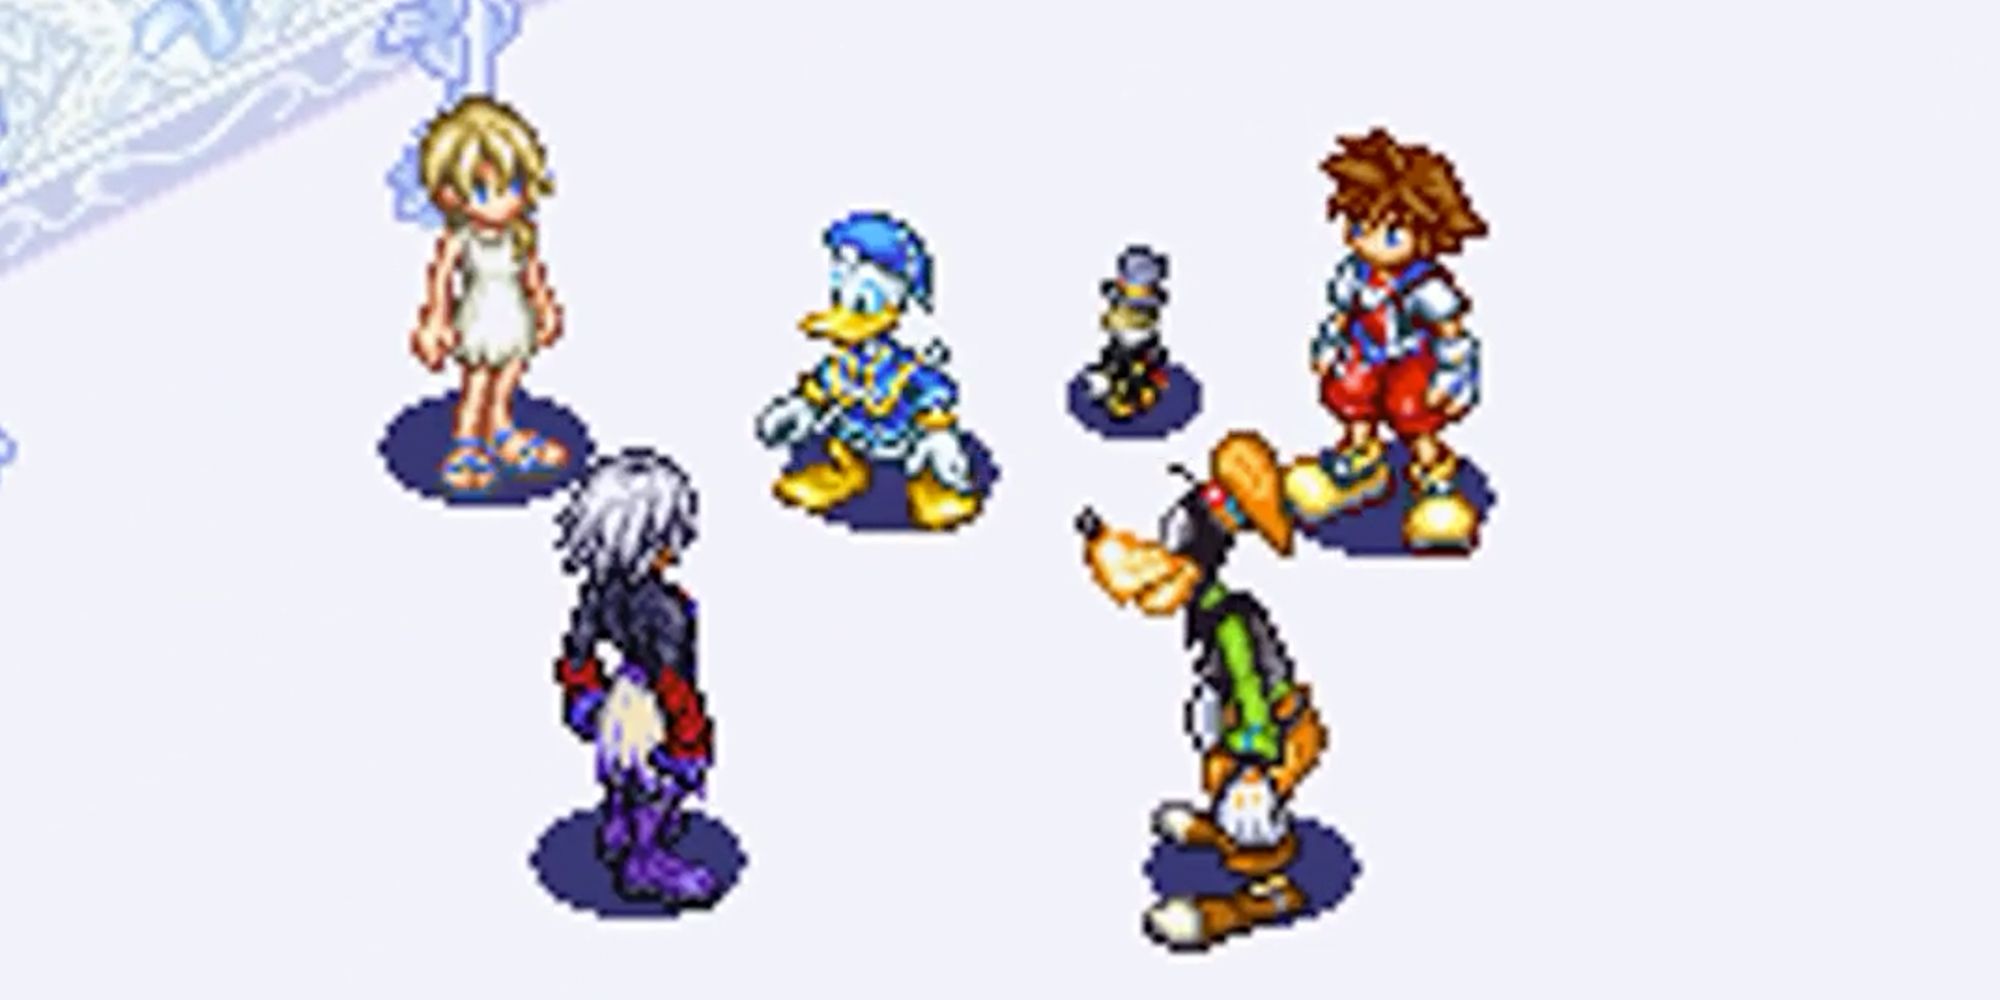 Sora, Namine, Riku, Donald, and Goofy congregate in the hall of Kingdom Hearts: Chain Of Memories' Castle Oblivion.